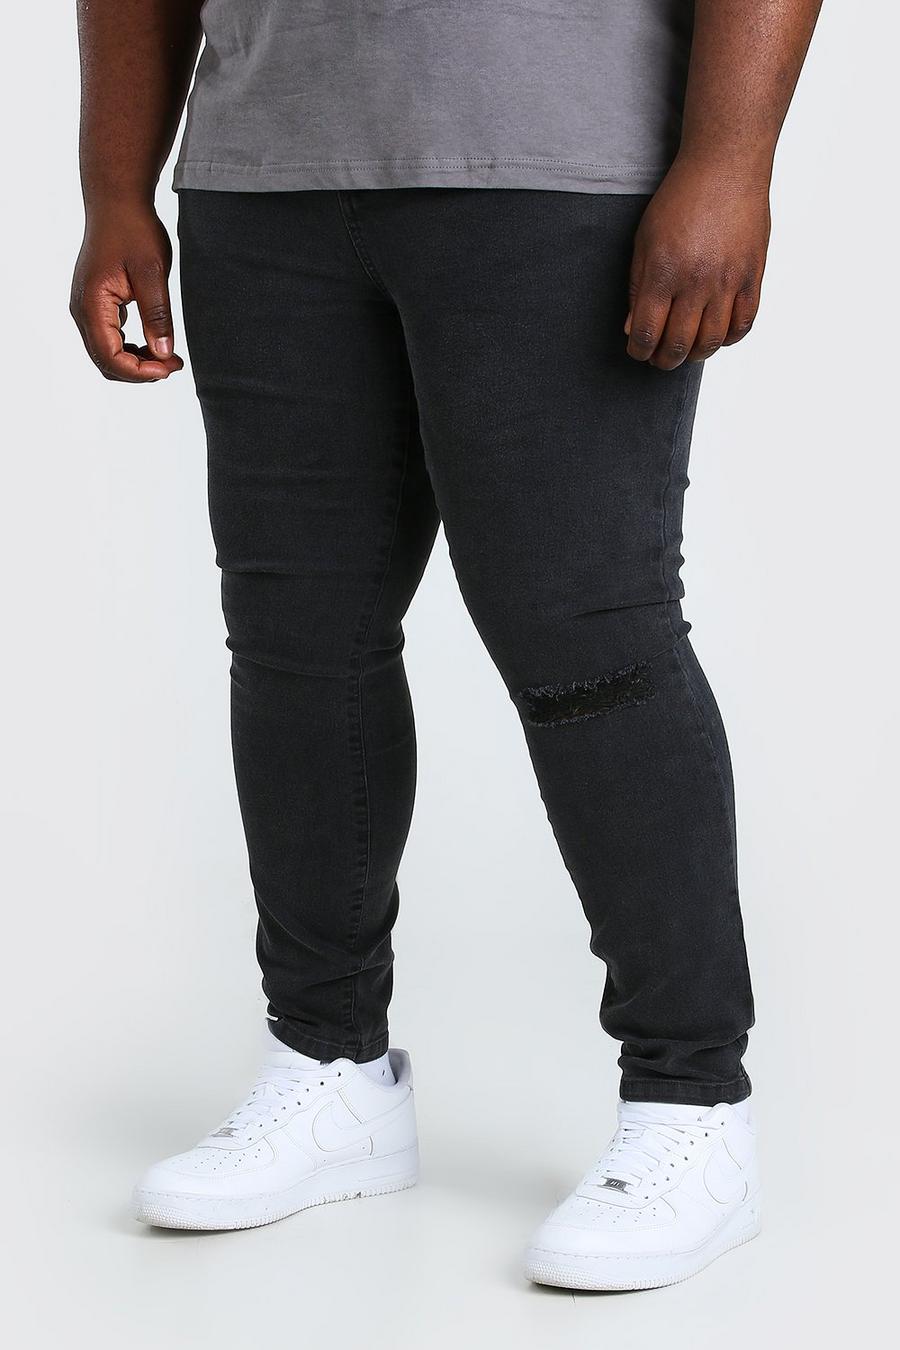 Charcoal grey Plus Size Busted Knee Super Skinny Jean